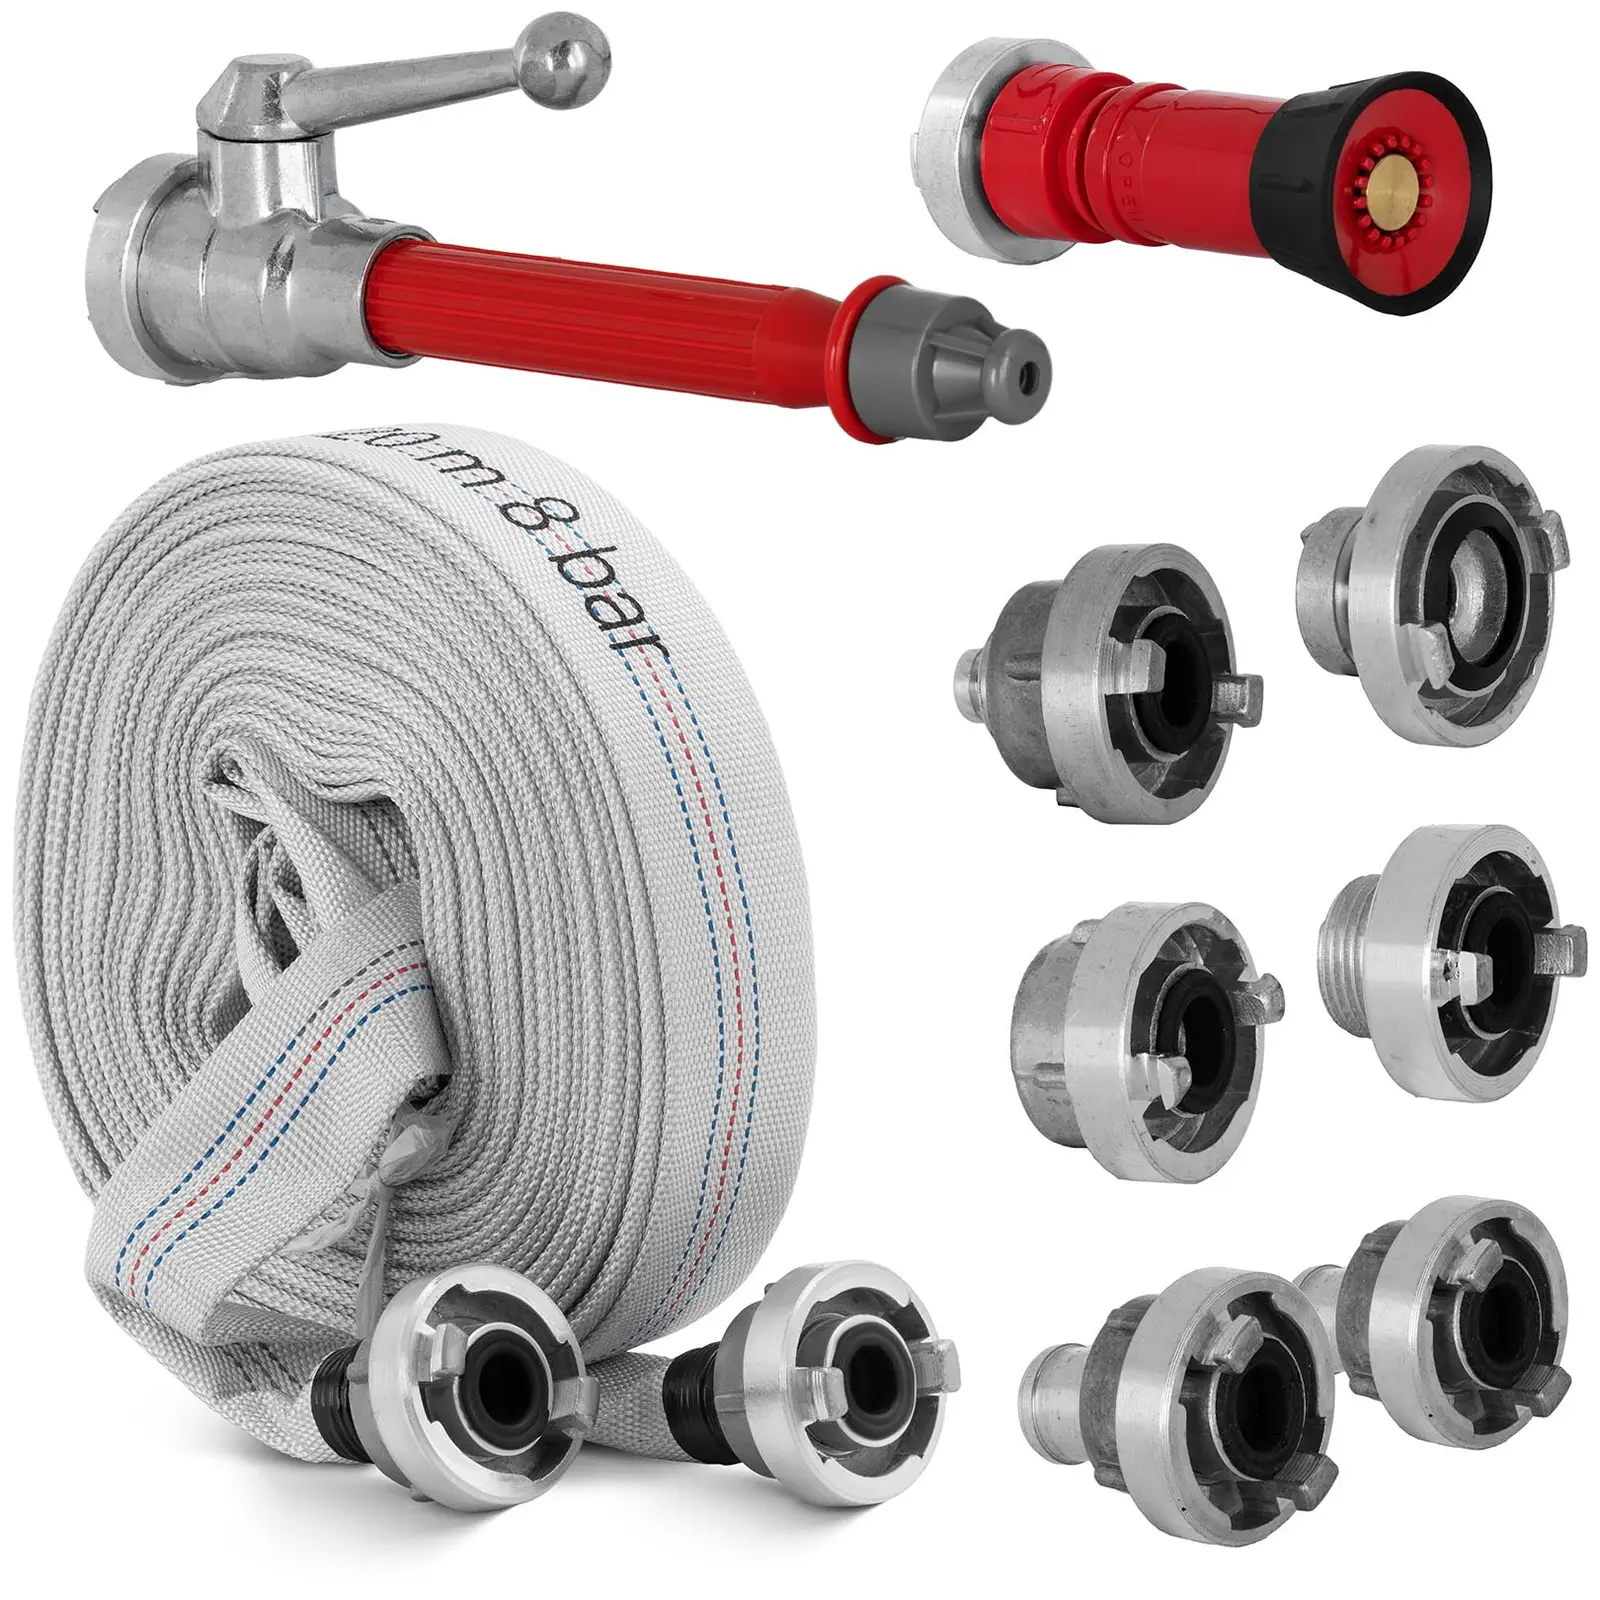 Complete Industrial Hose Set - 1" - 20 m - 0 - 8 bar - Storz - with extensive accessories